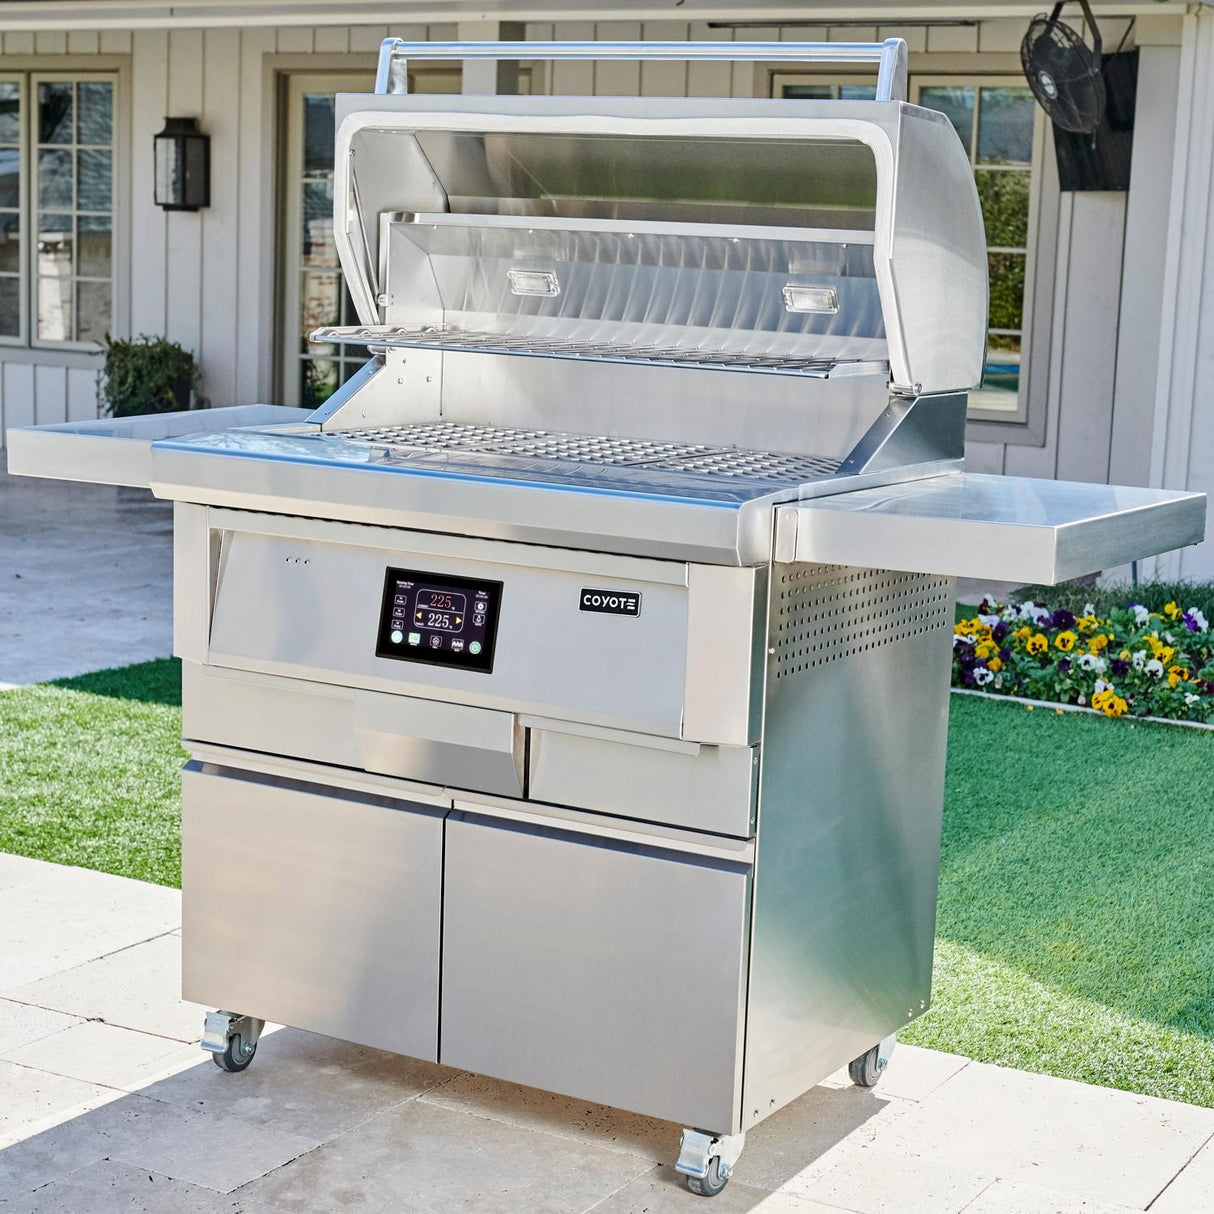 Coyote 36" Freestanding Stainless Steel Wood-Fired Pellet Grill w/ Cart C1P36-FS